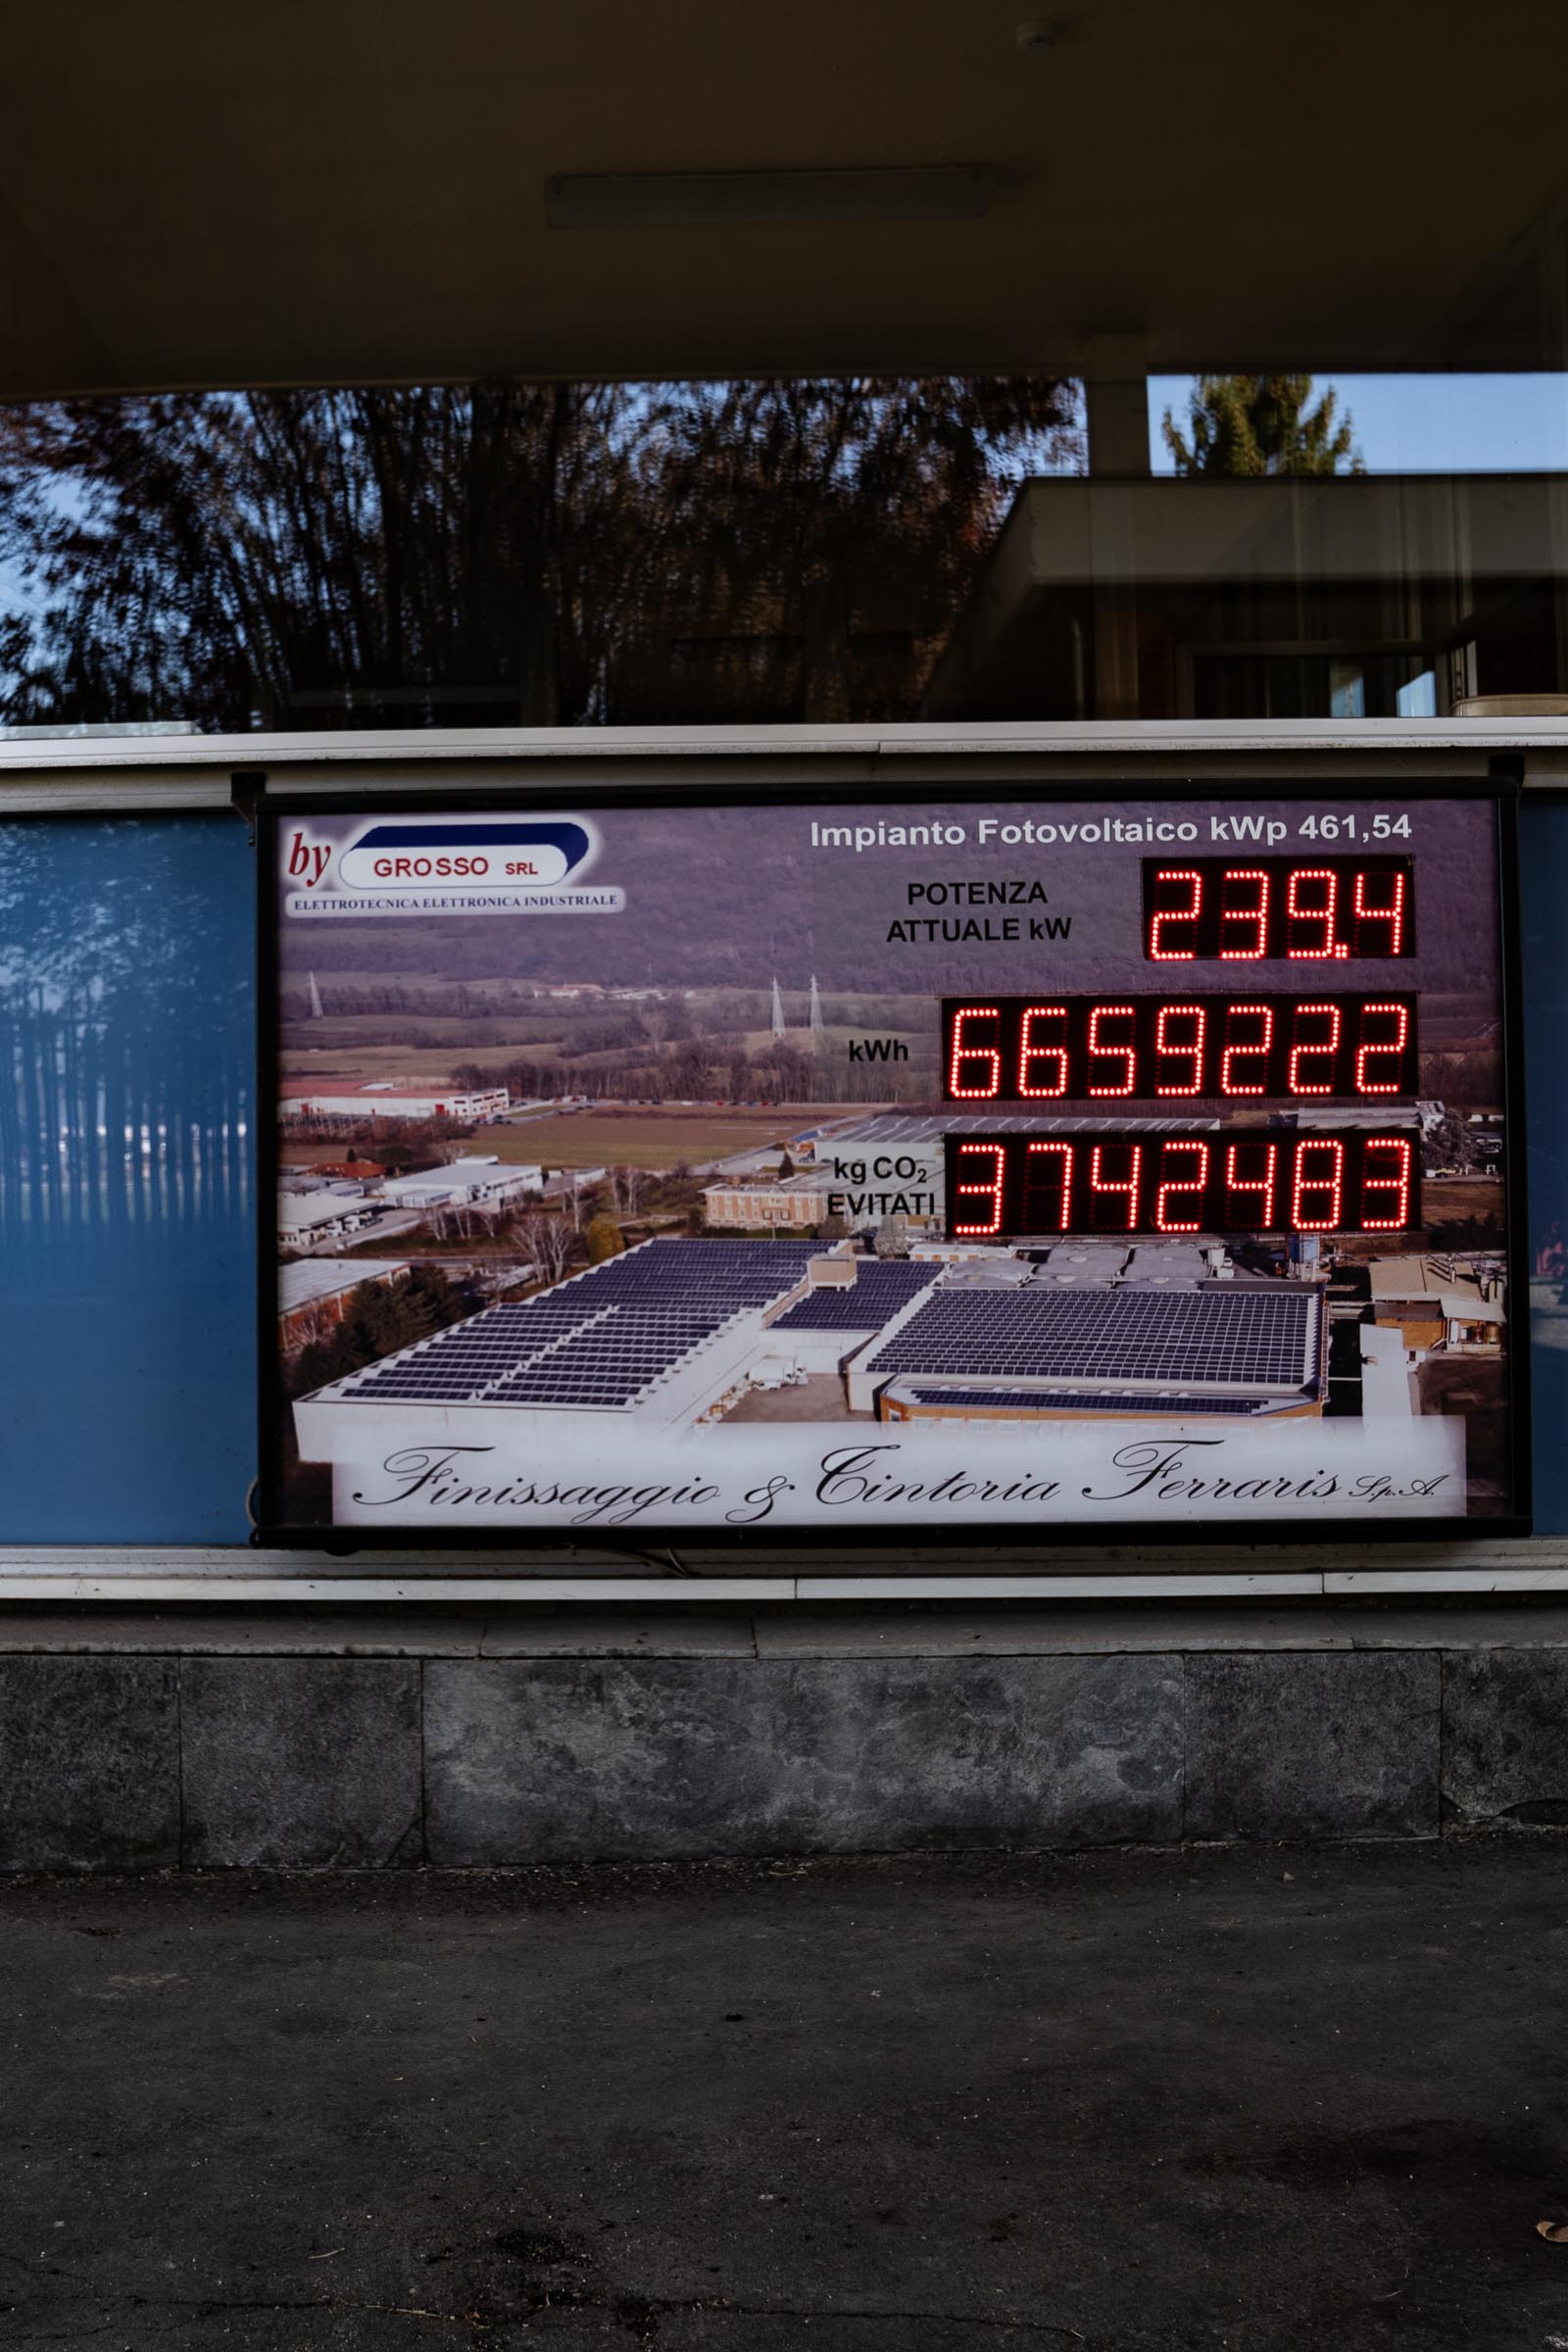 An electronic board displaying the amount of kWh generated and CO2 saved since installation at the facility of Tintoria Ferraris.